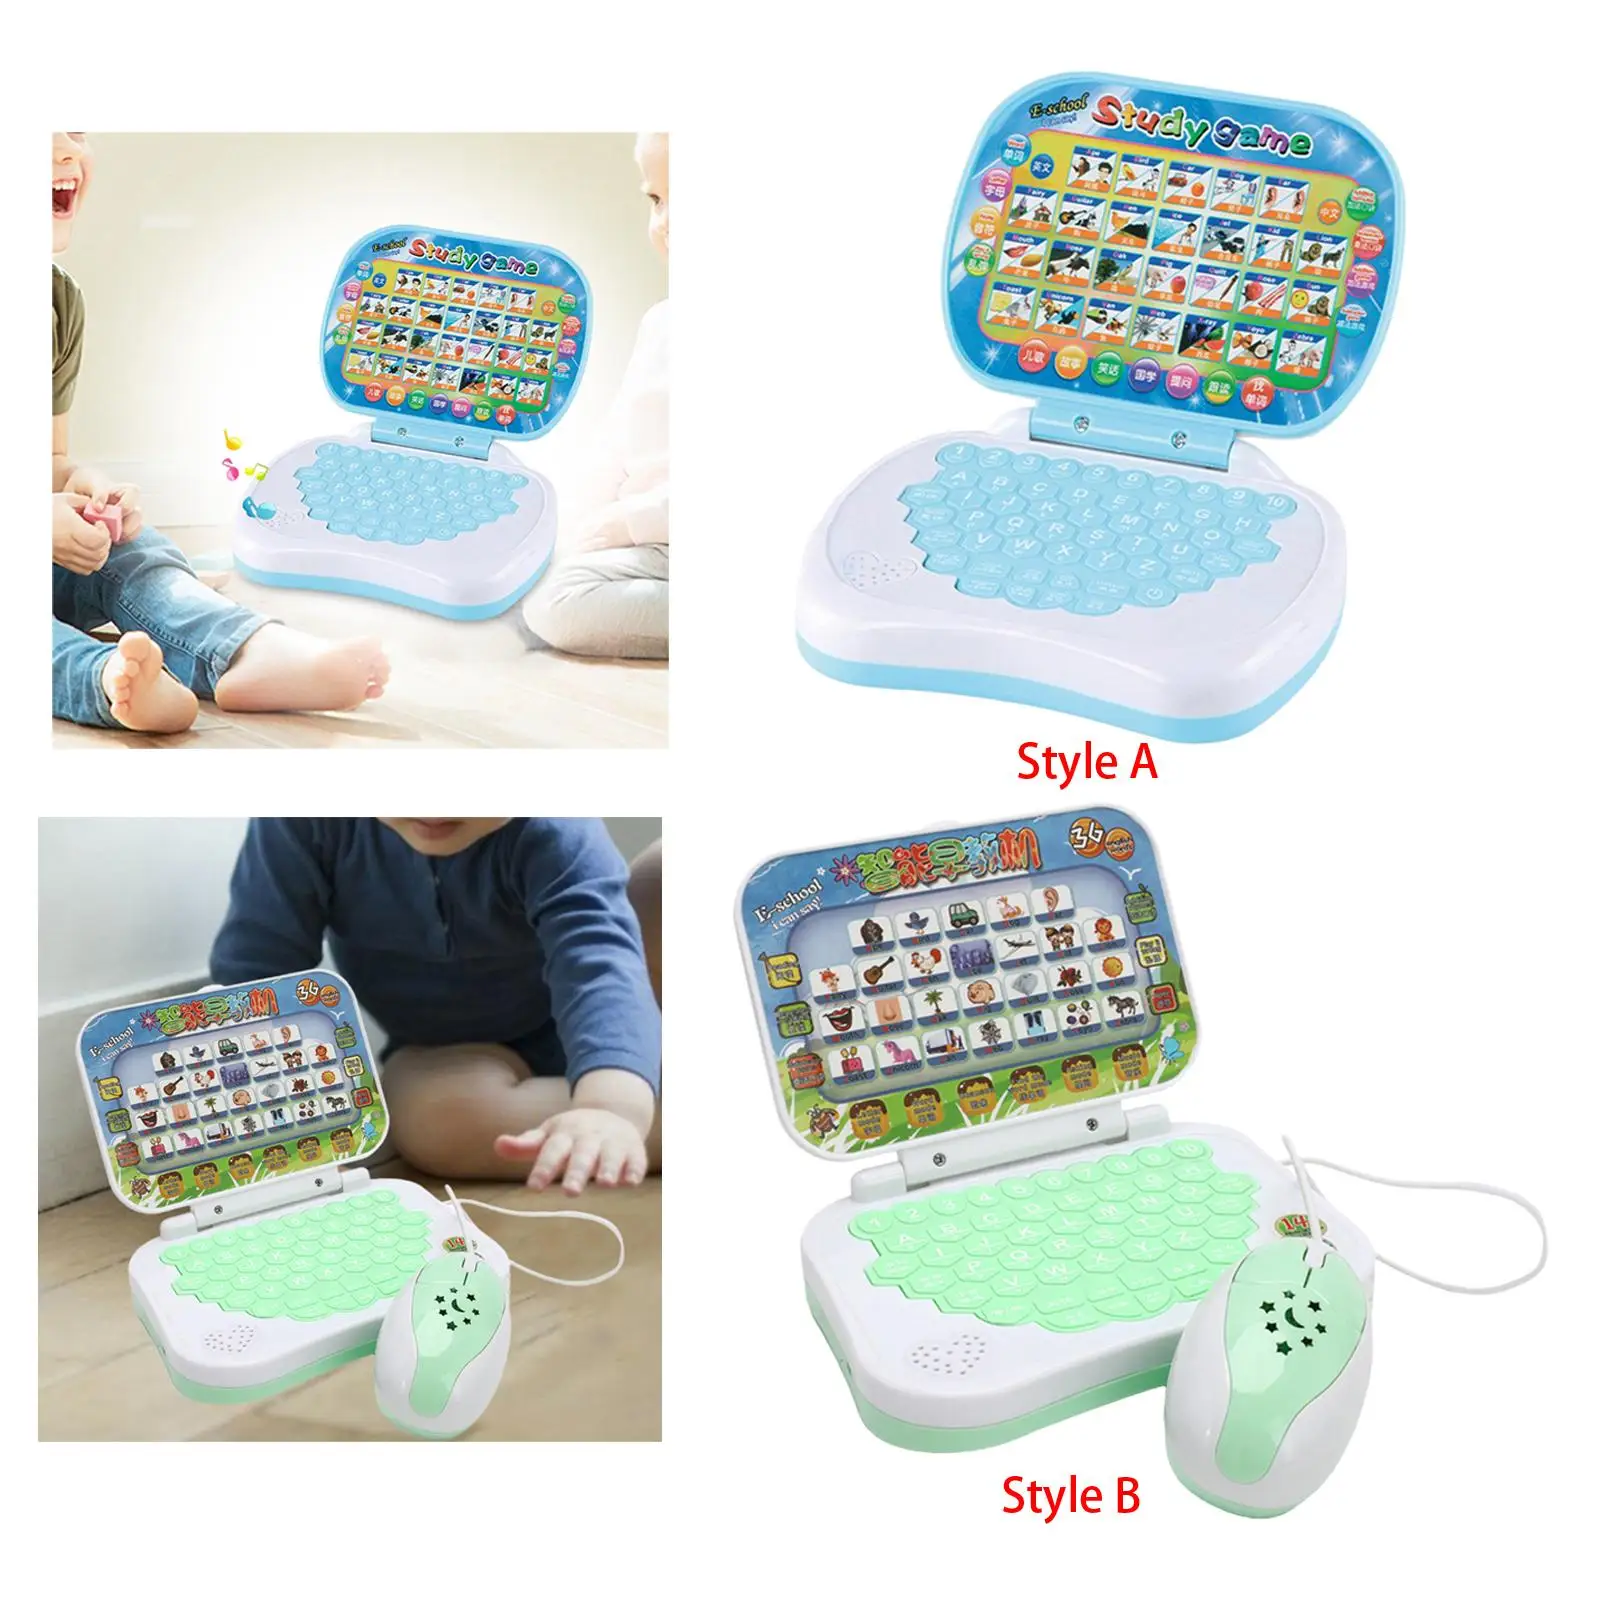 Learning Machine Activities Study Game English Early Education Toy Computer Kids Laptop Toy for Toddler Girls Boys Bithday Gifts